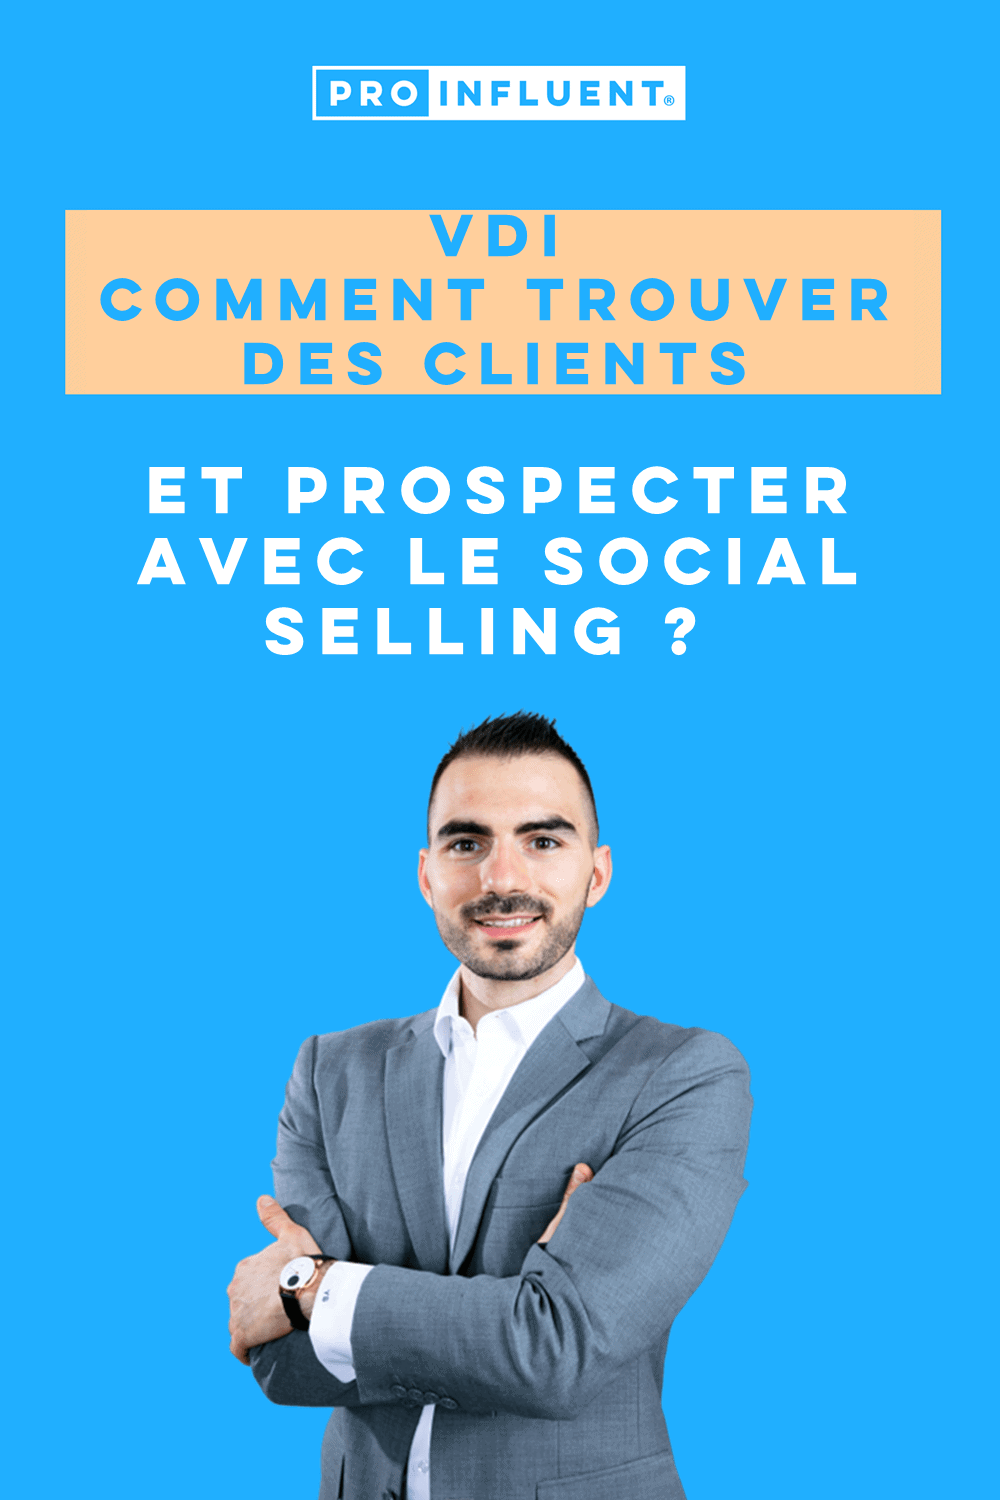 Vdi how to find customers and prospect with social selling?